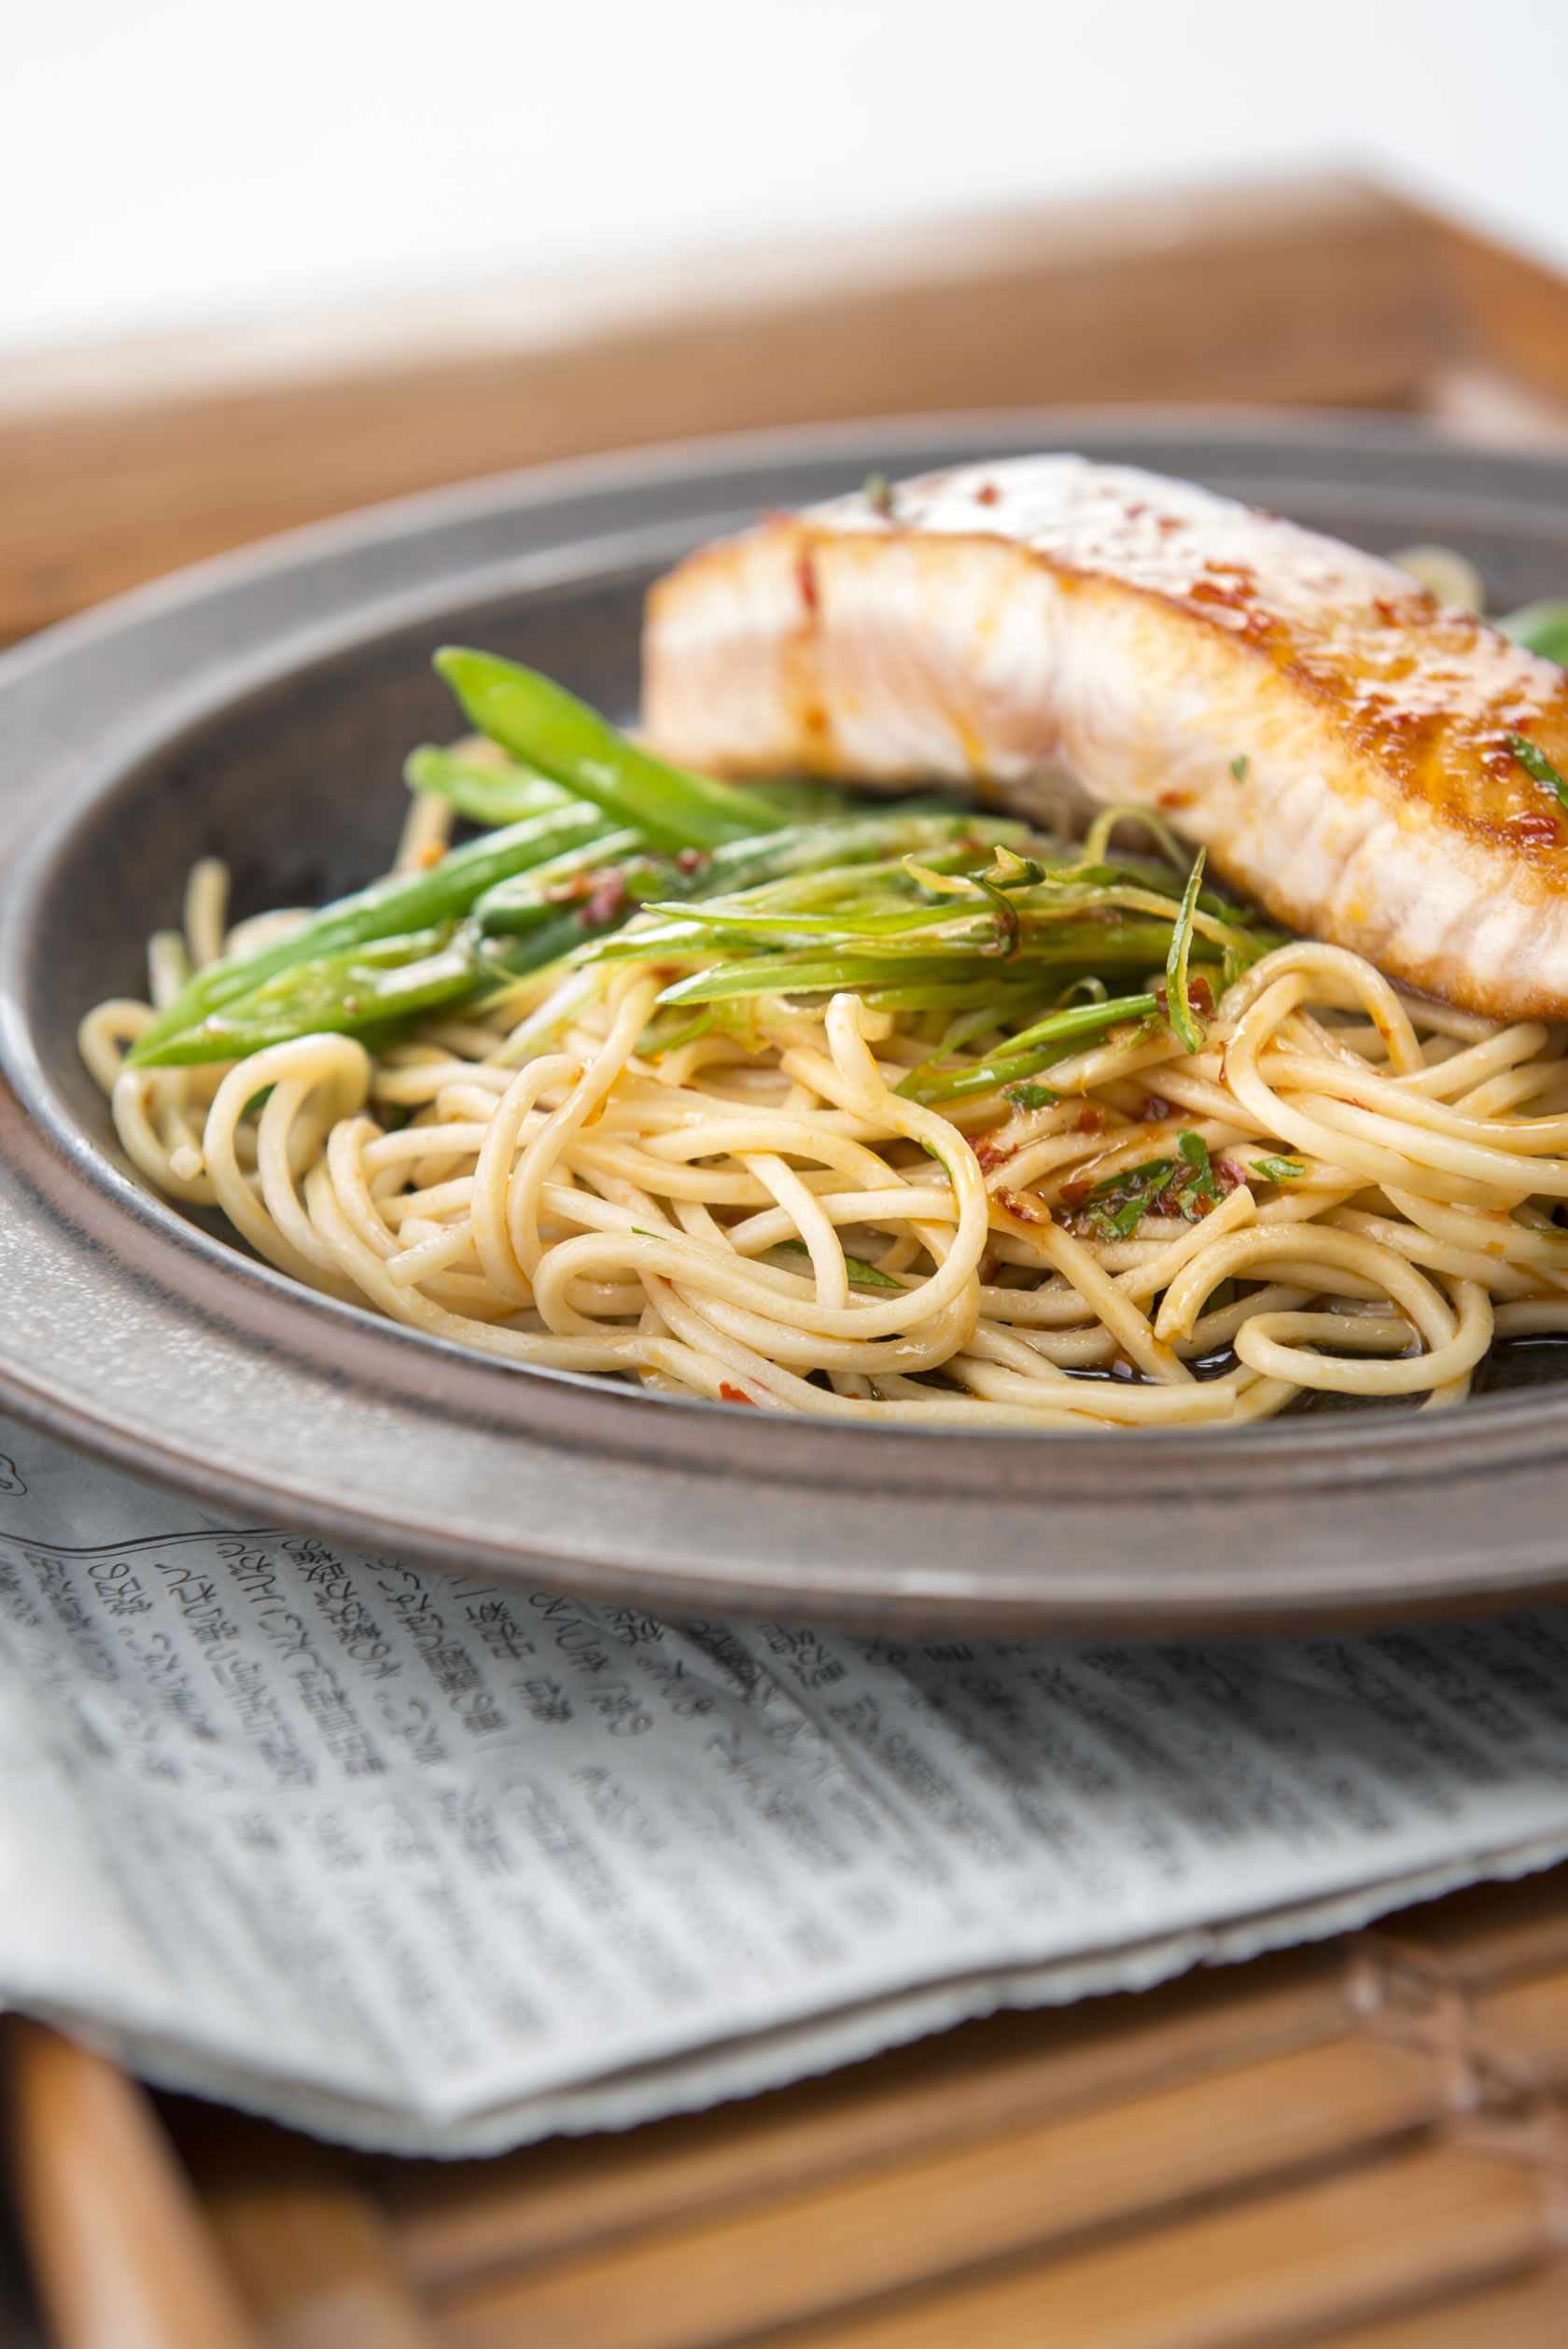 Pan grilled Salmon with Ramen noodles, ginger & lime